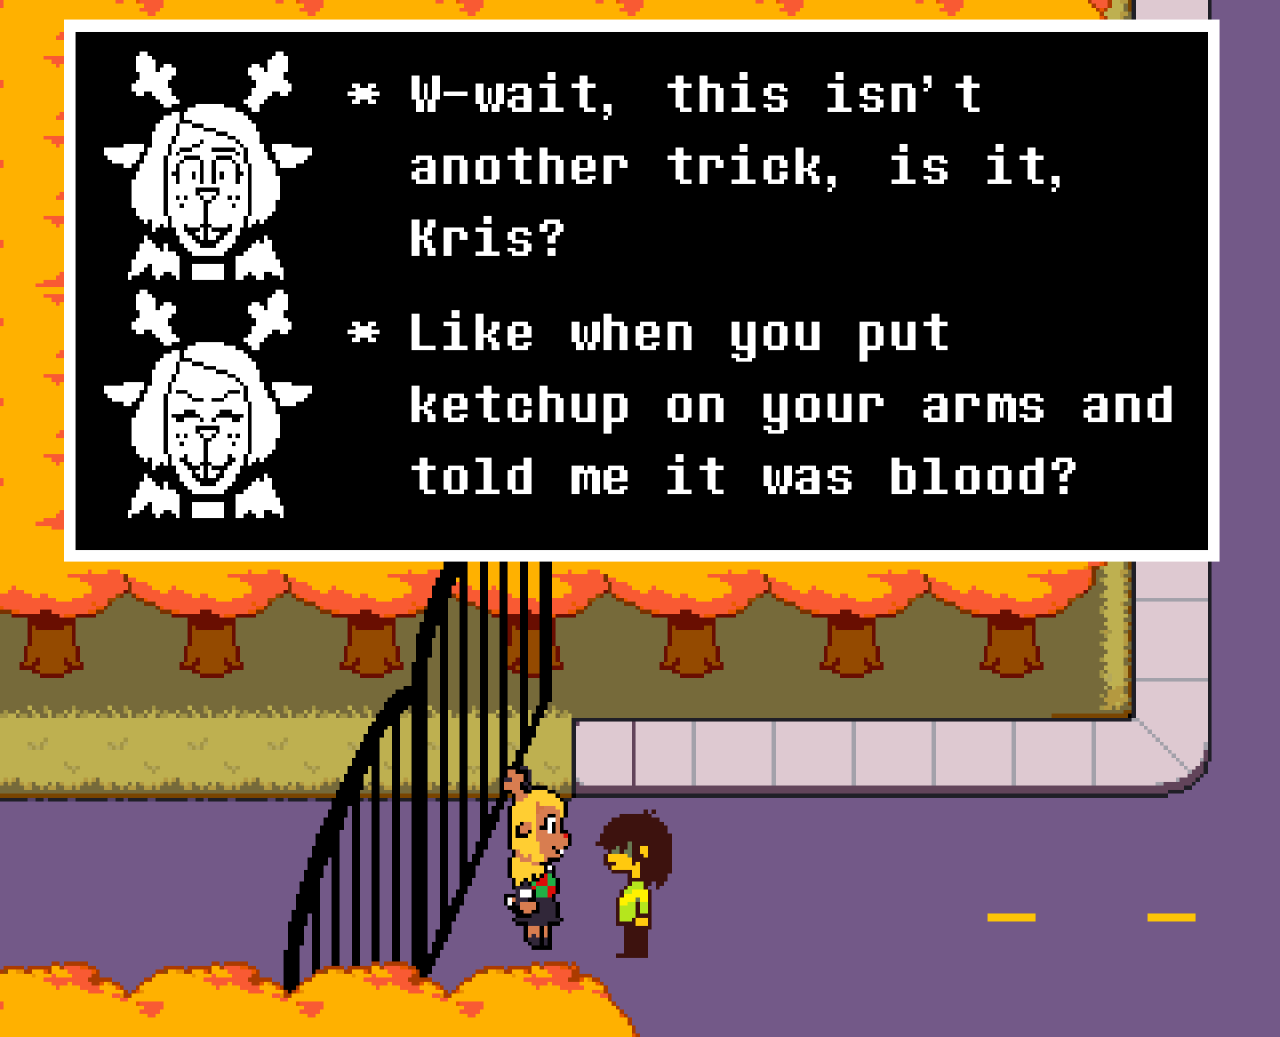 Sans. Undertale. Screenshots and annotations by the author.